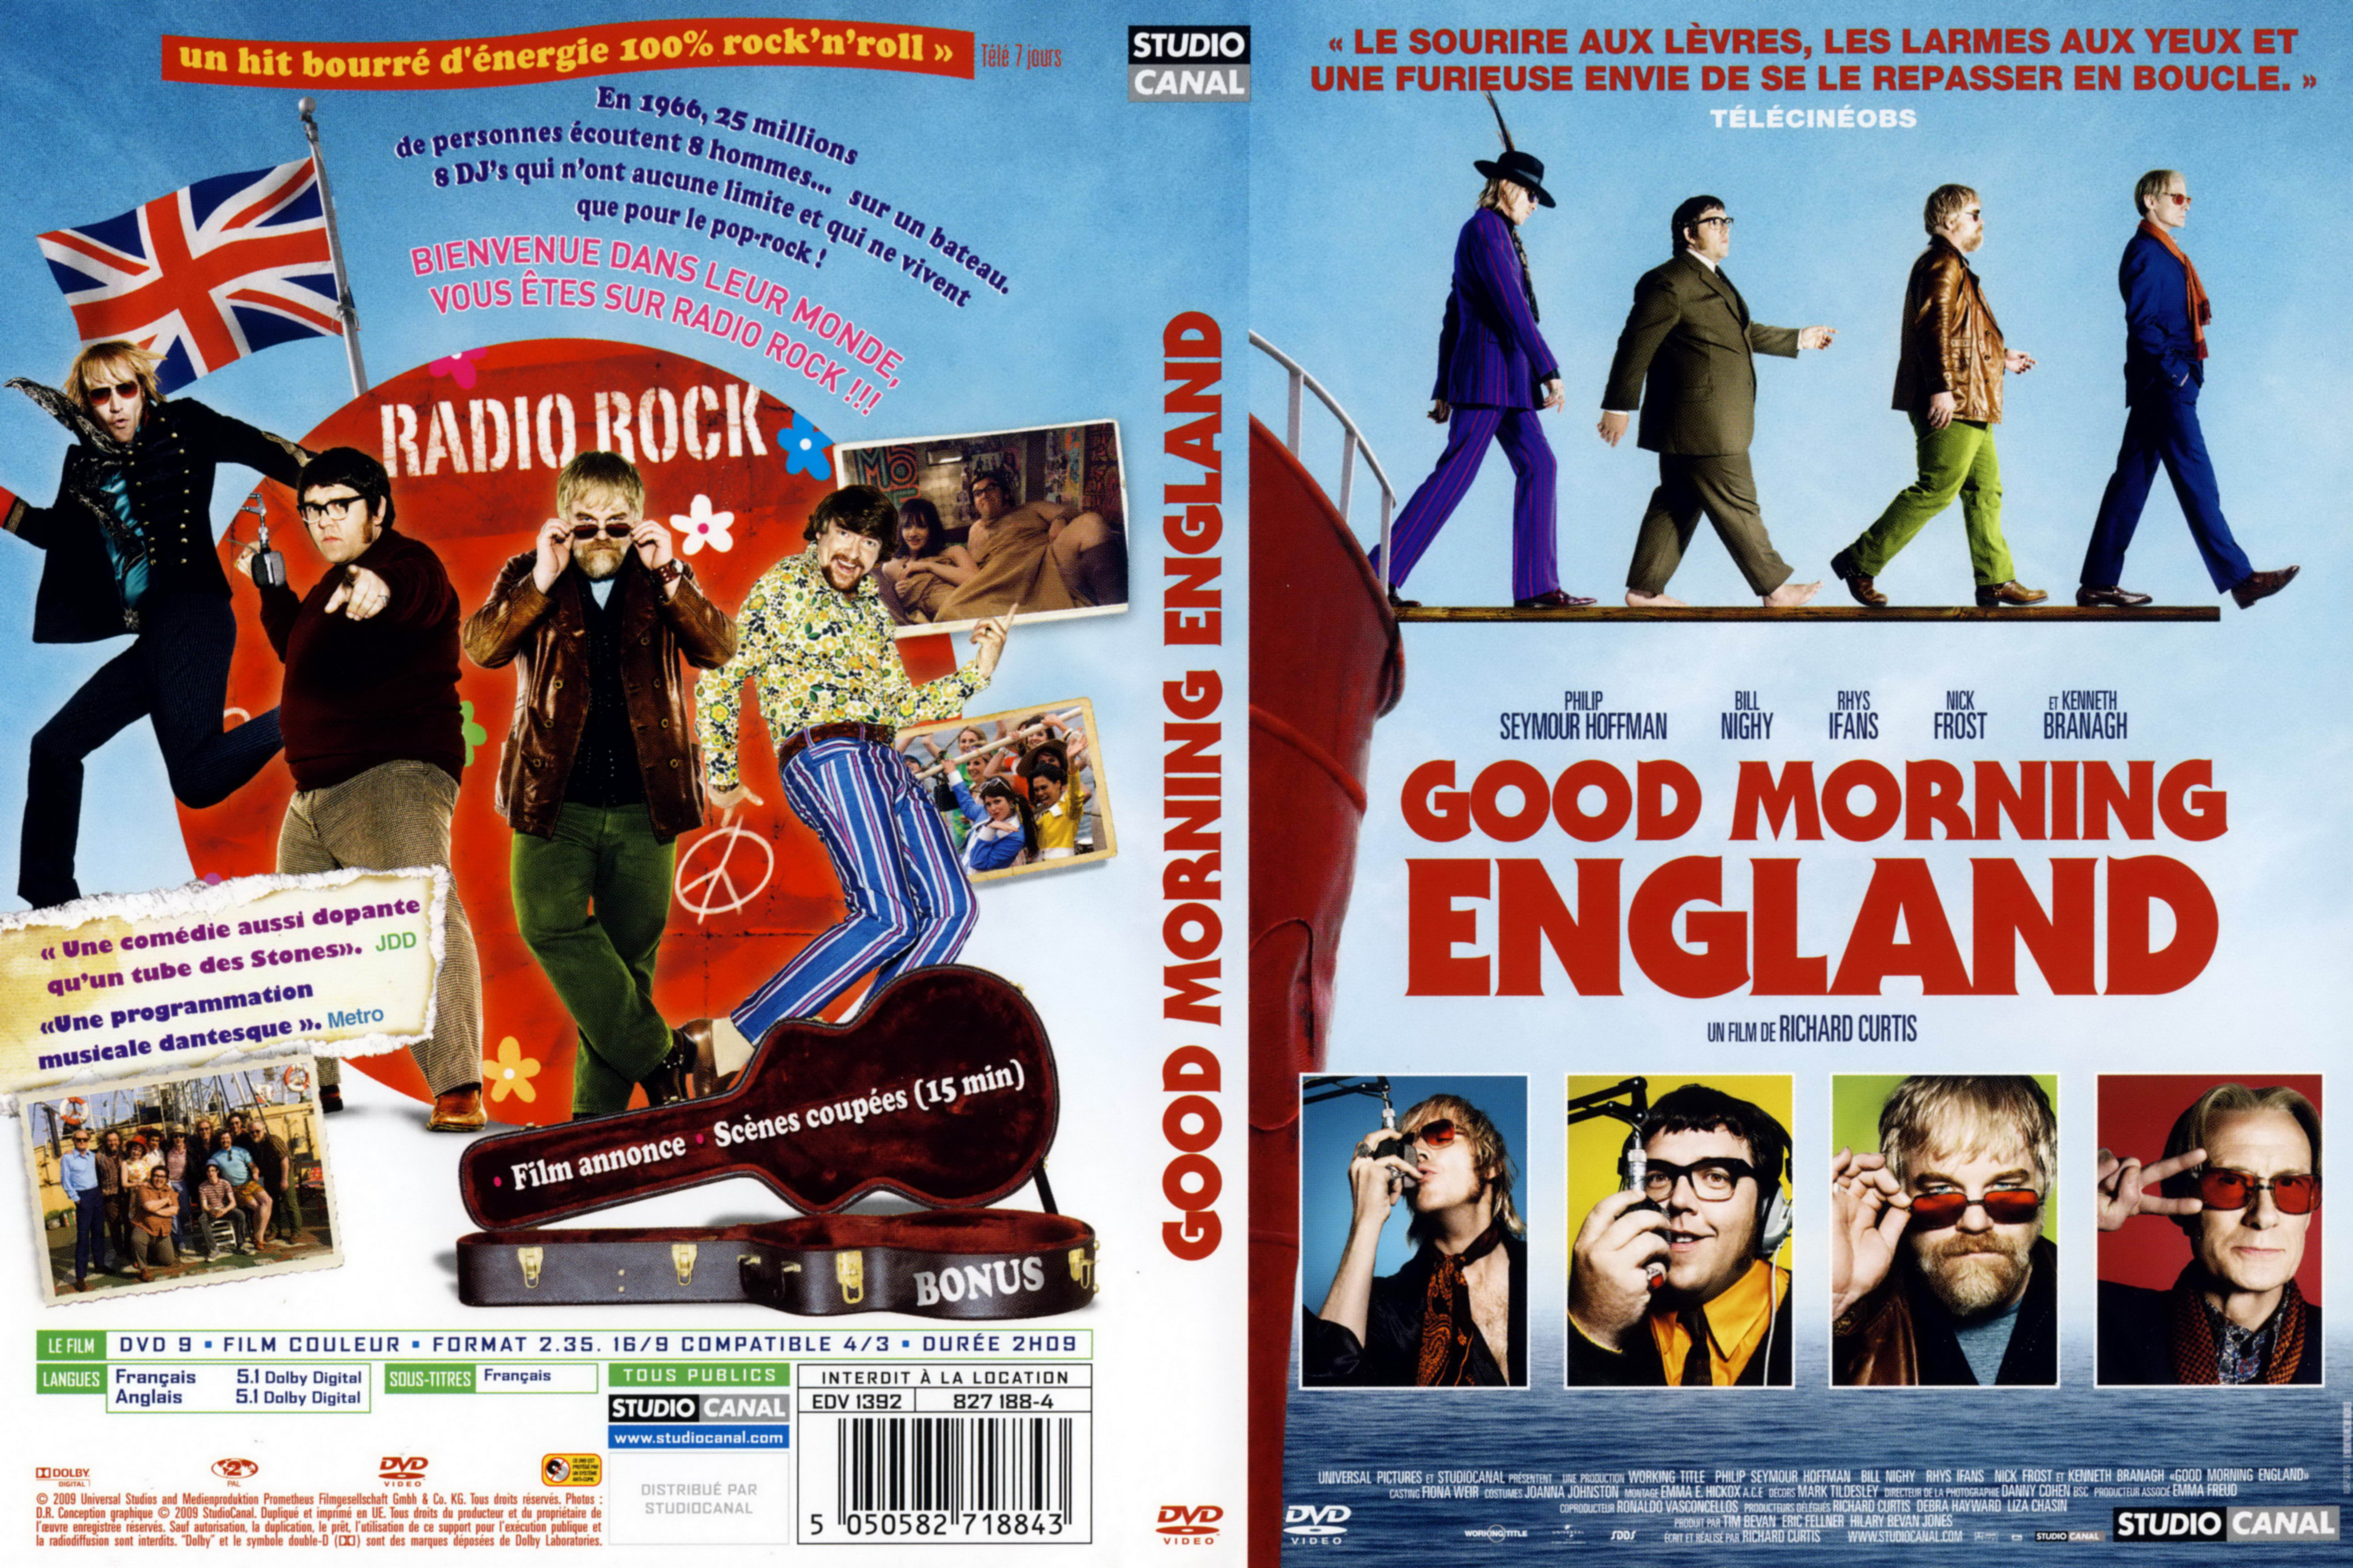 Jaquette DVD Good morning england